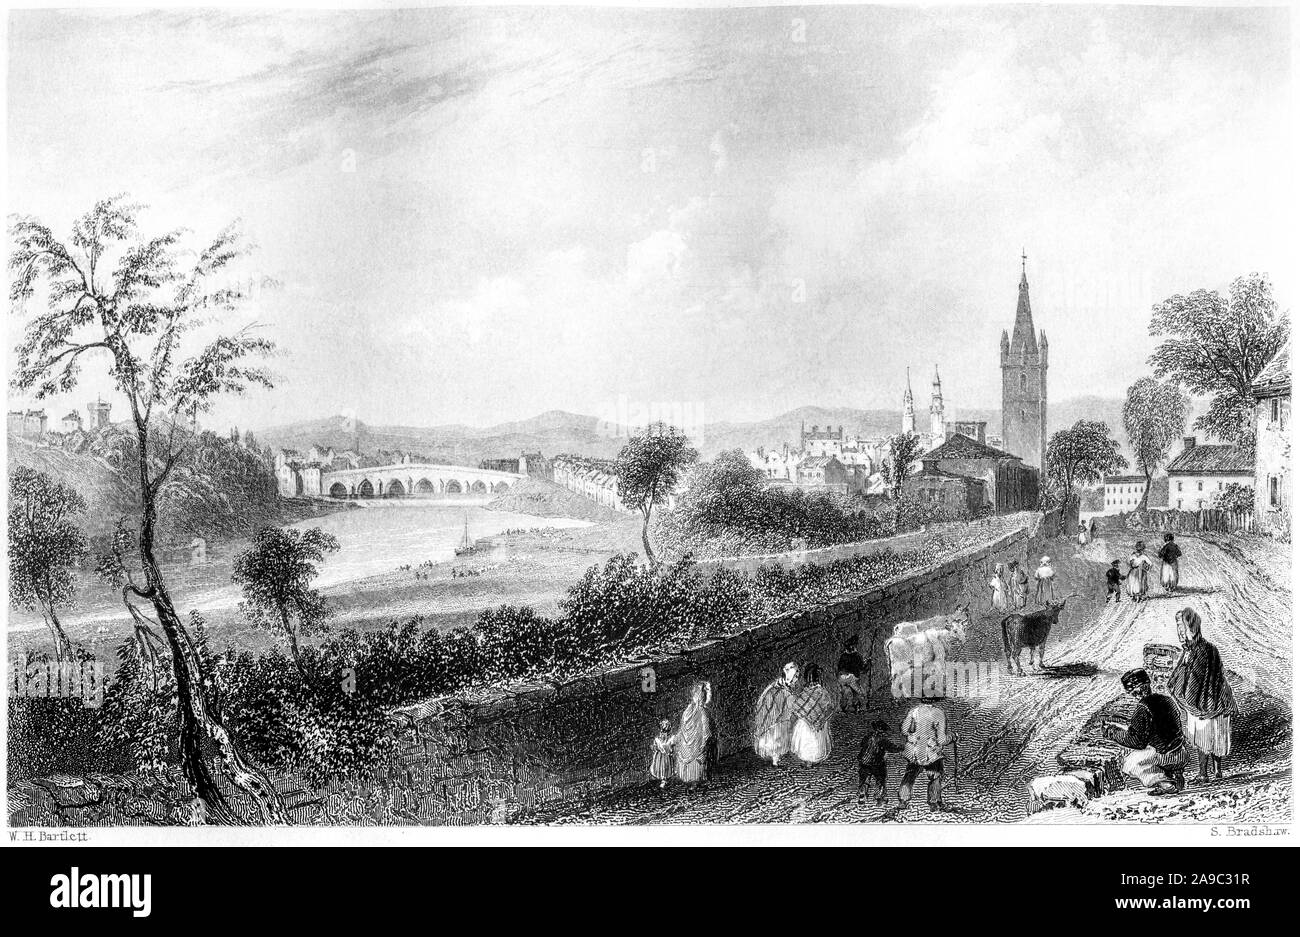 An engraving of the Town of Dumfries, Dumfrieshire, Scotland UK scanned at high resolution from a book printed in 1859. Believed copyright free. Stock Photo